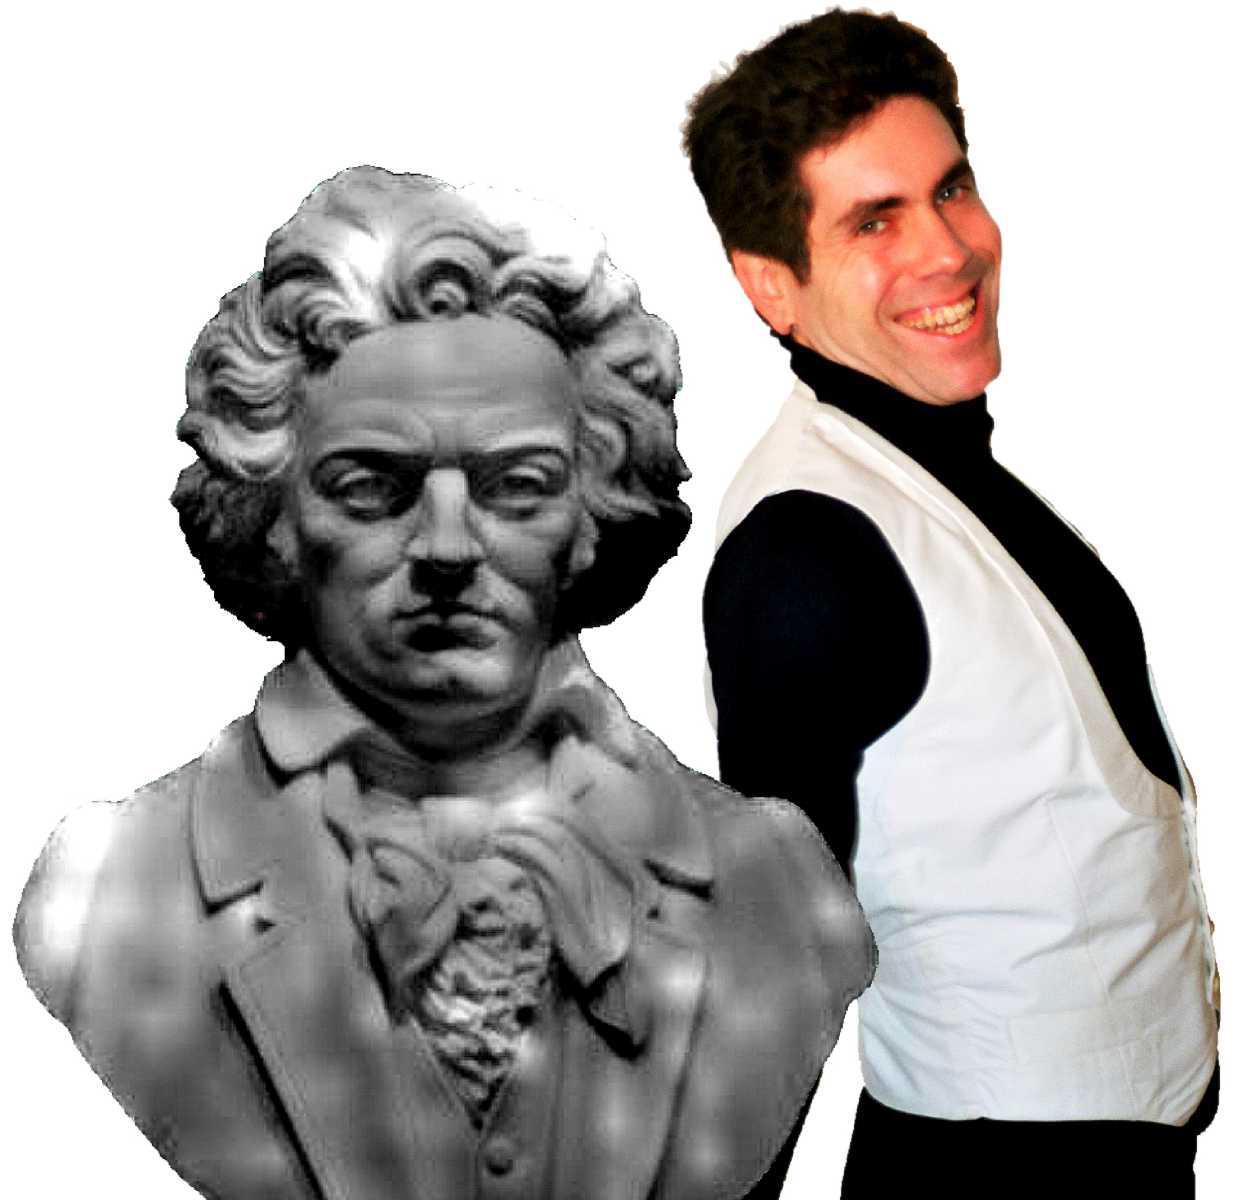 Jewish entertainment: Dr. Beethoven and Mr. Broadway